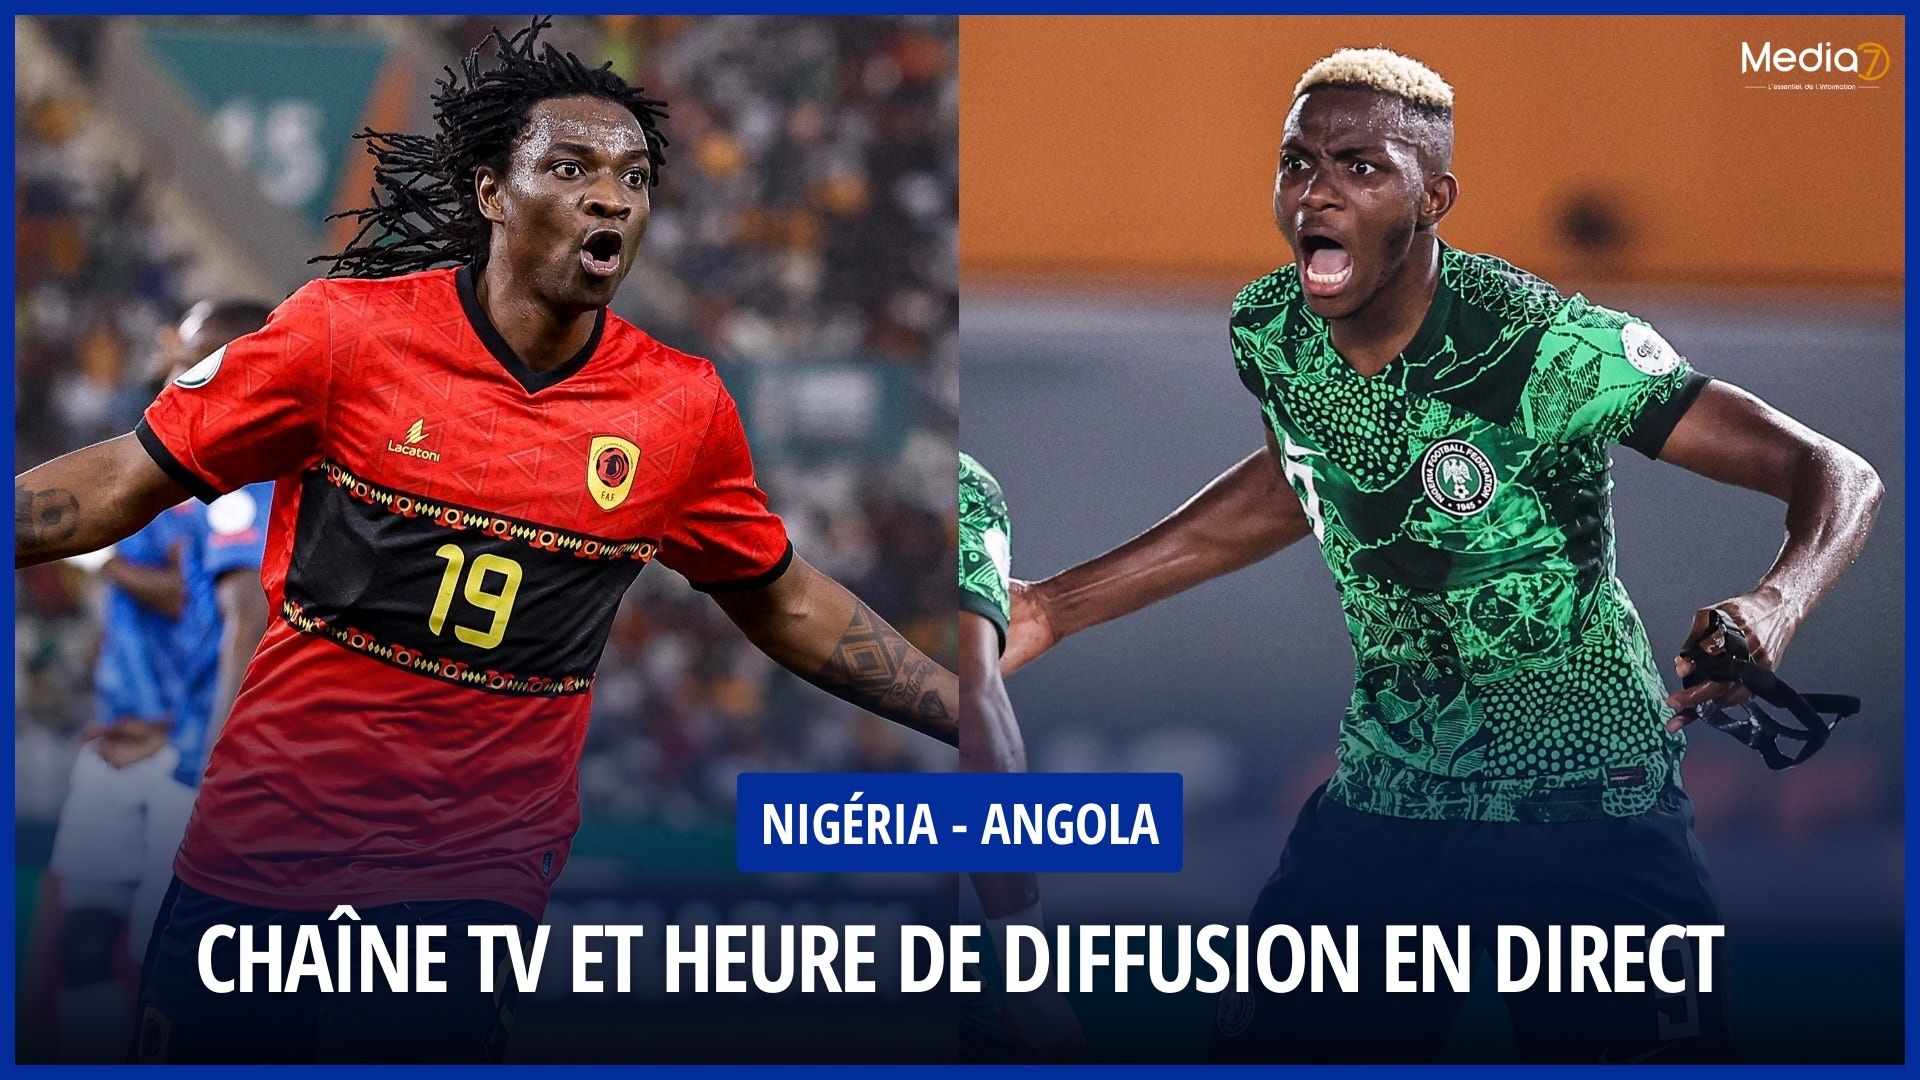 Follow the Nigeria - Angola Match live: TV channel and broadcast time - Media7